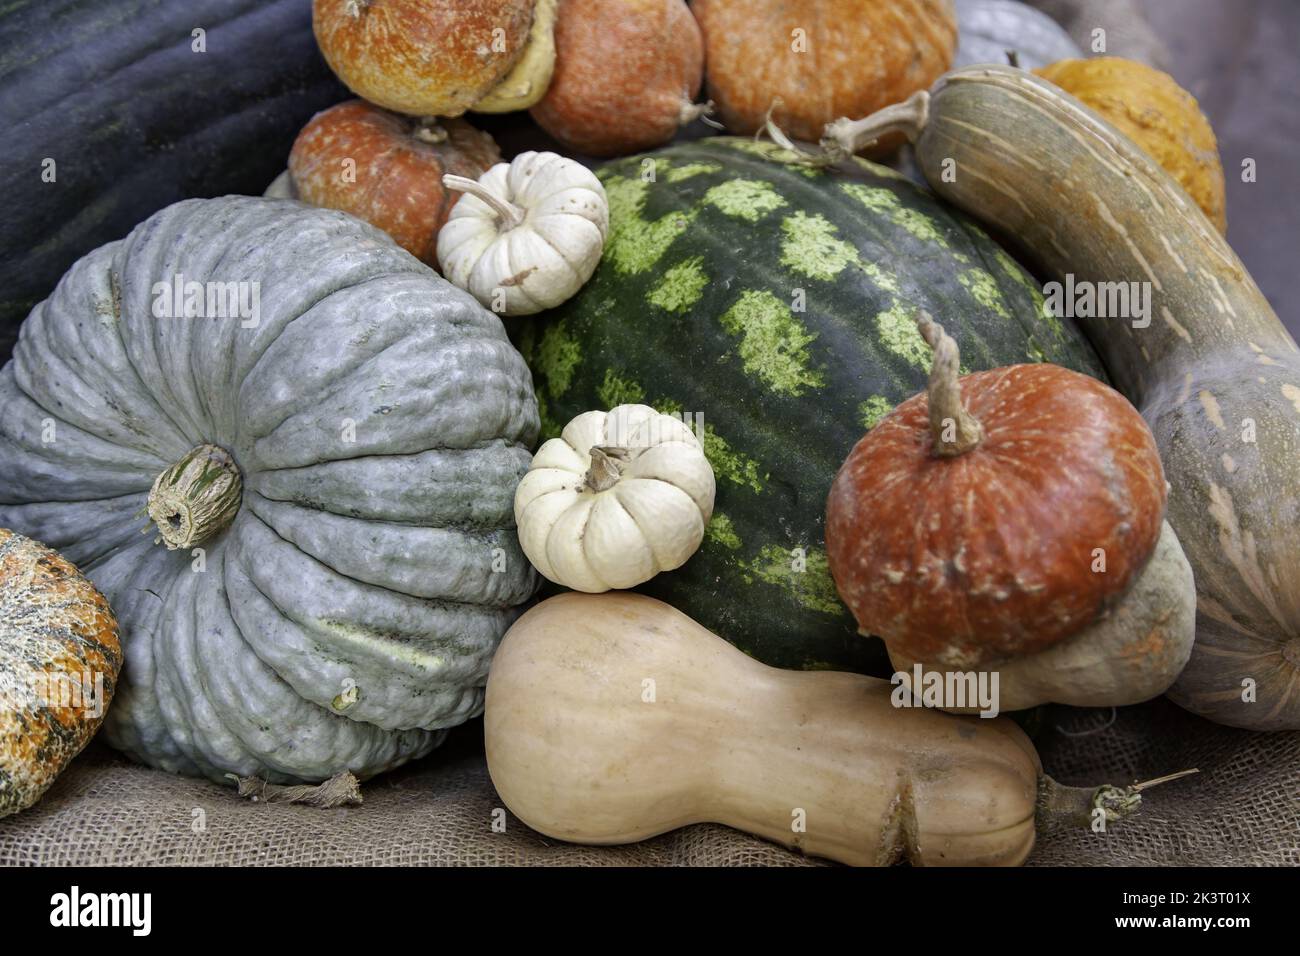 Detail of different types of pumpkins in market Stock Photo